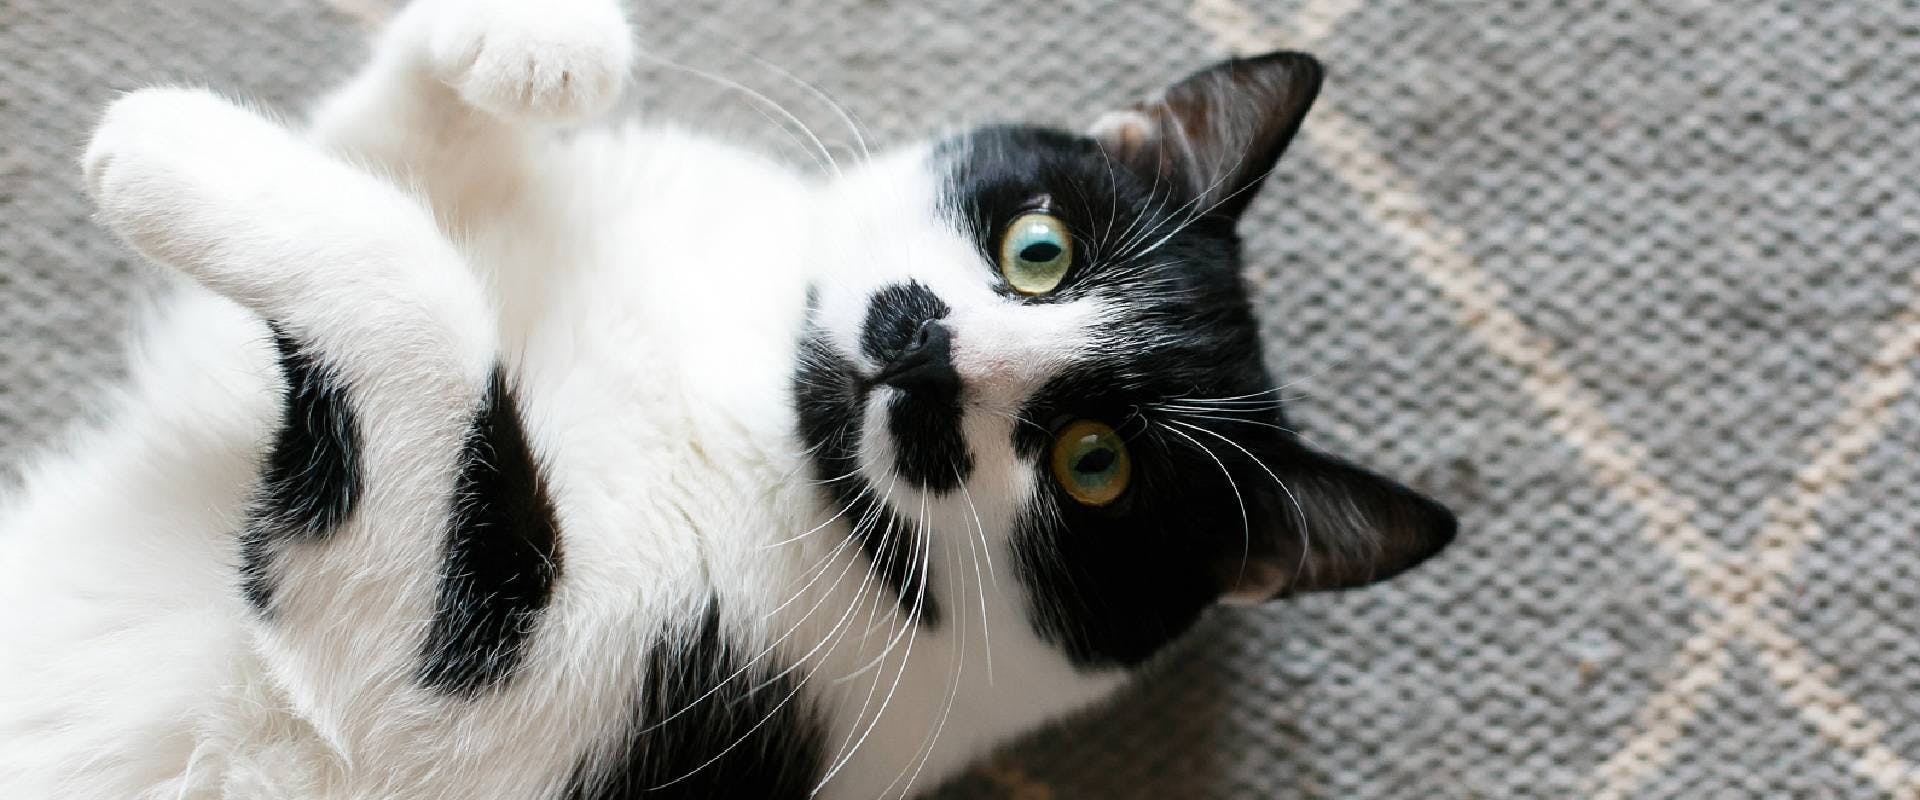 12 Black And White Cat Facts | Trustedhousesitters.Com